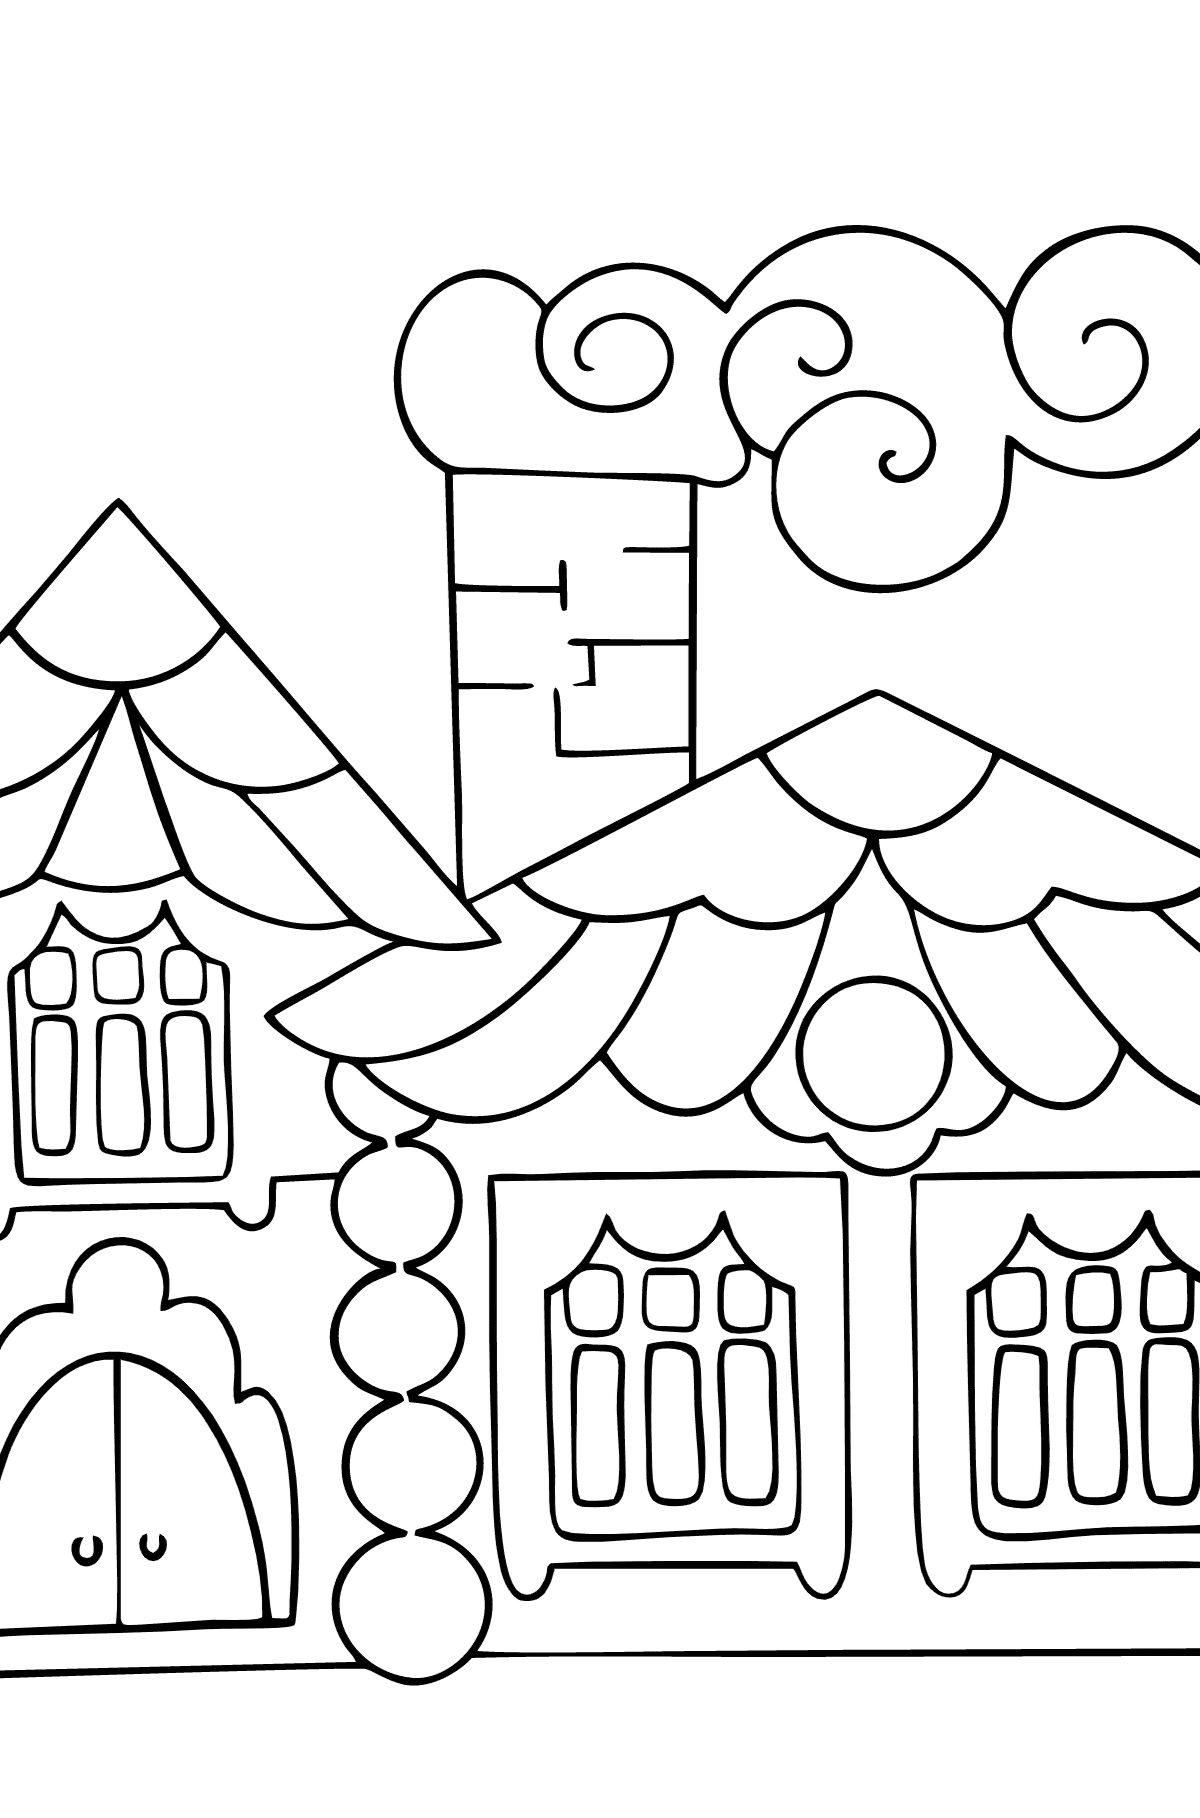 House in the Forest Coloring Page - Coloring Pages for Kids